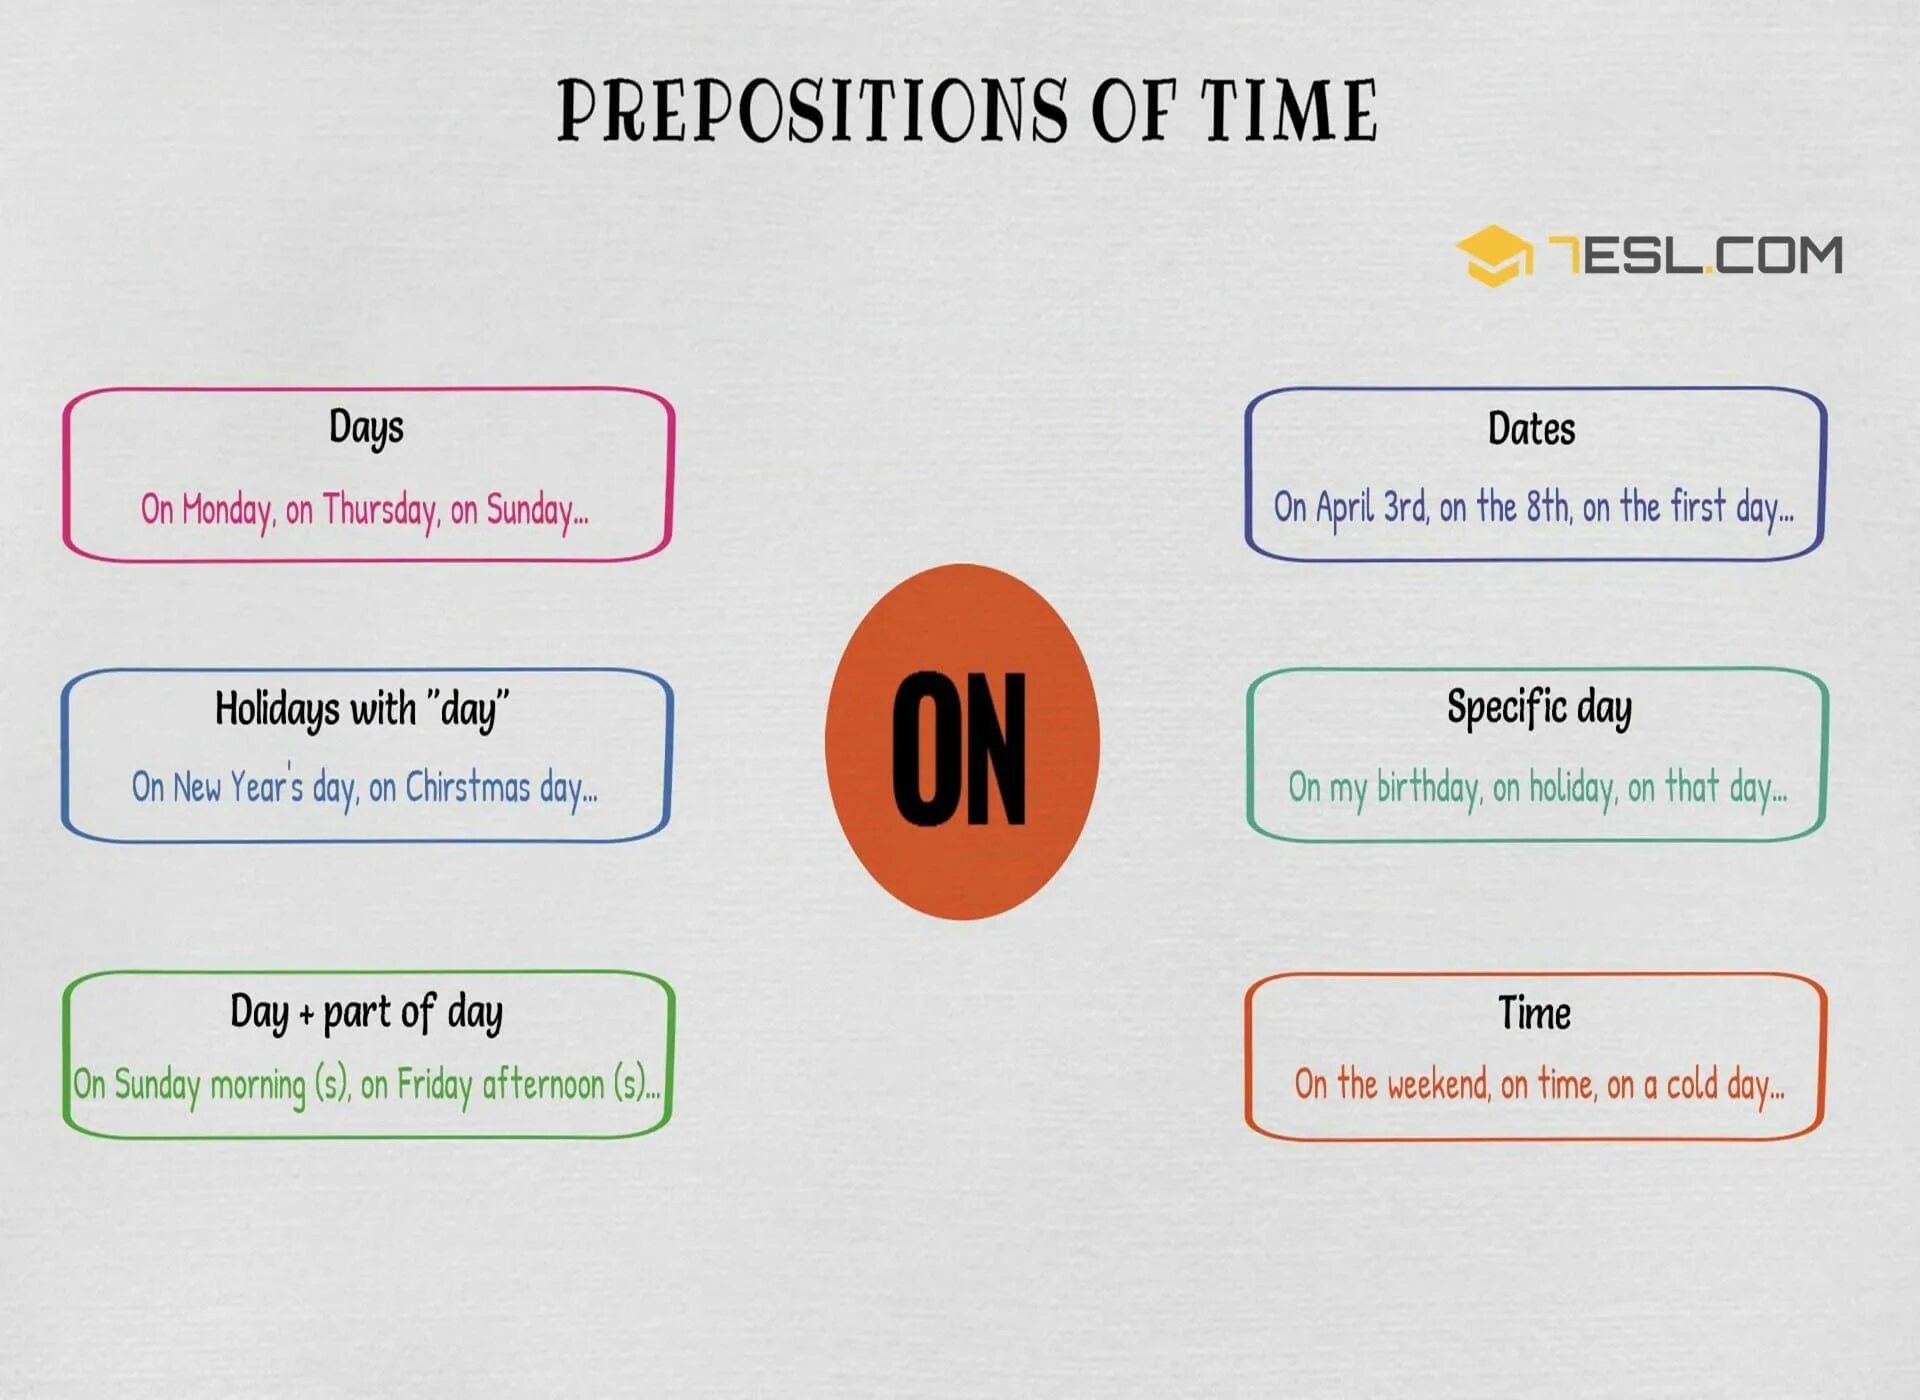 Weekend preposition. Prepositions of time at on in. Preposition of time in. Prepositions of time at. Prepositions of time правила.